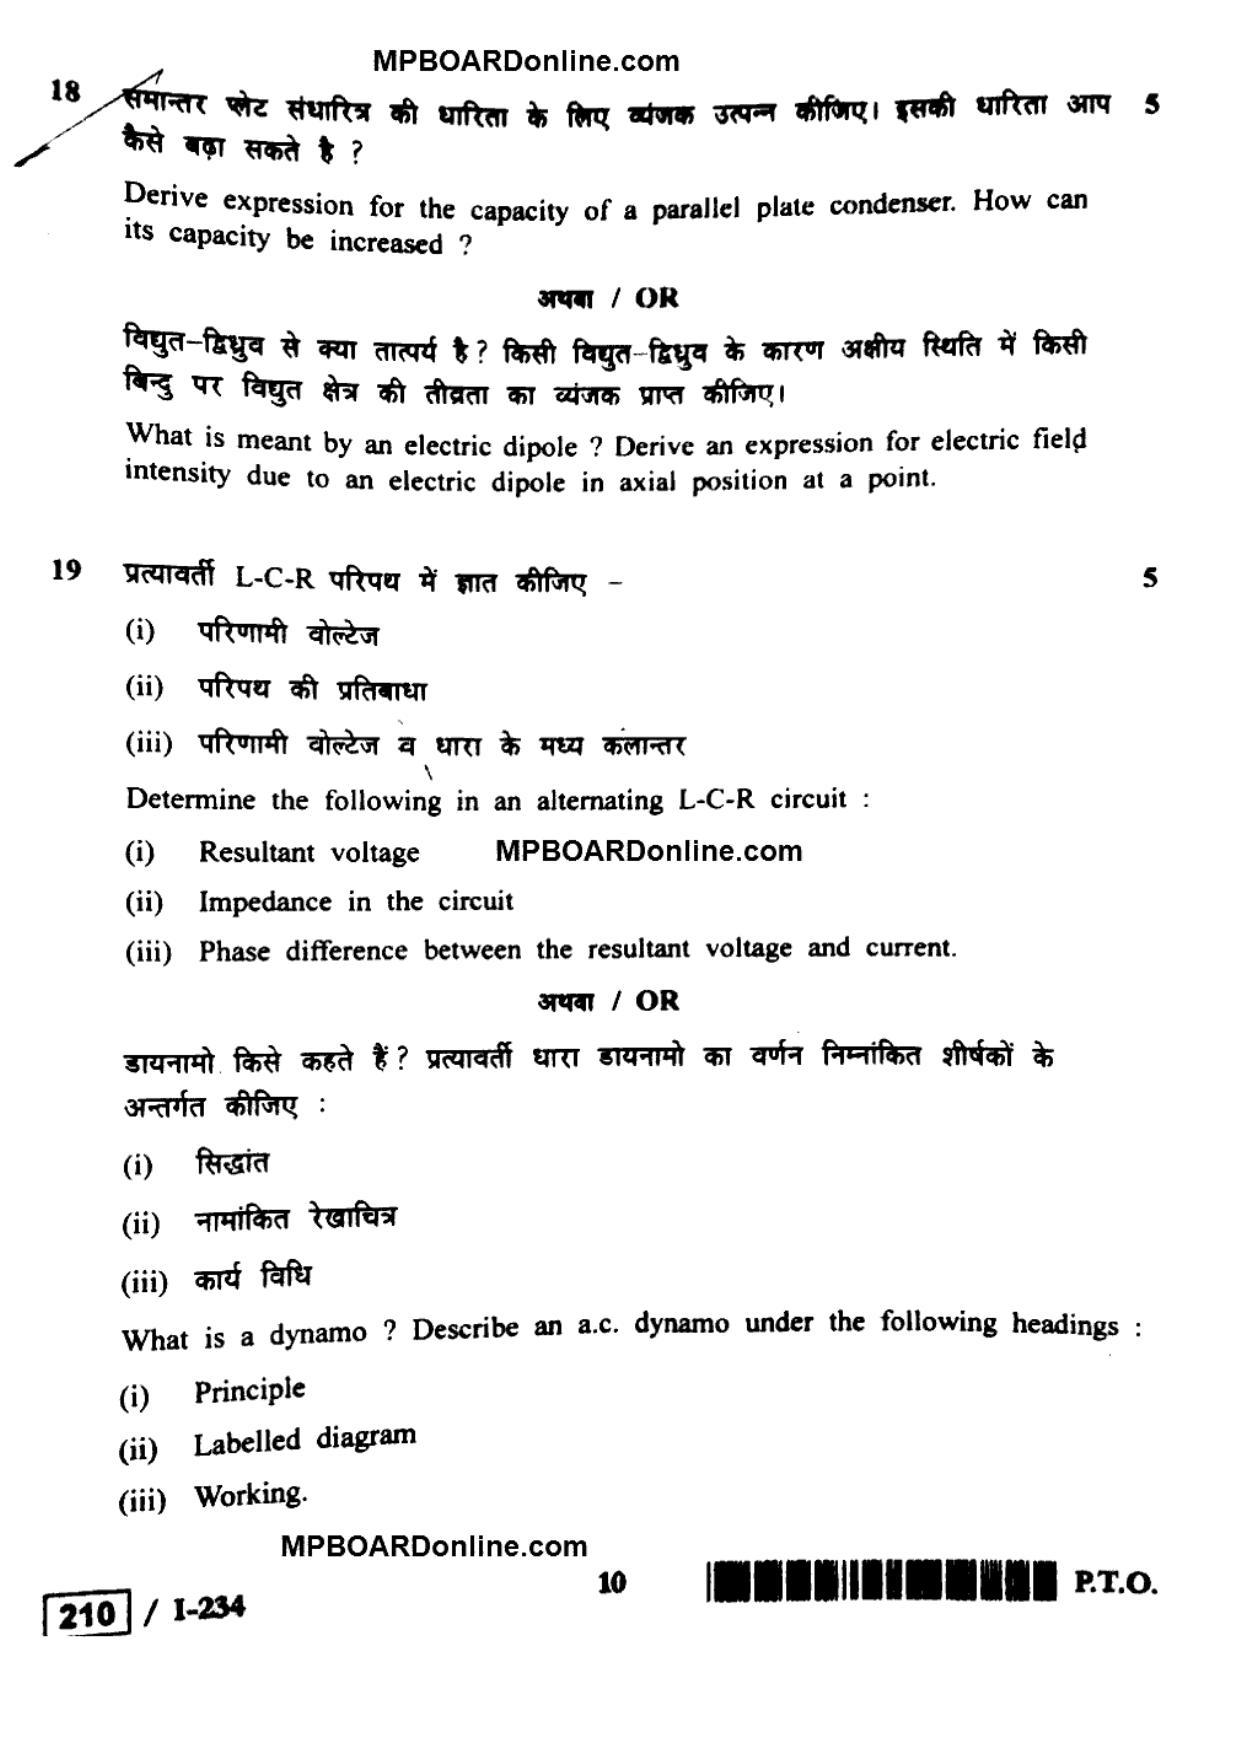 MP Board Class 12 Physics 2018 Question Paper - Page 10